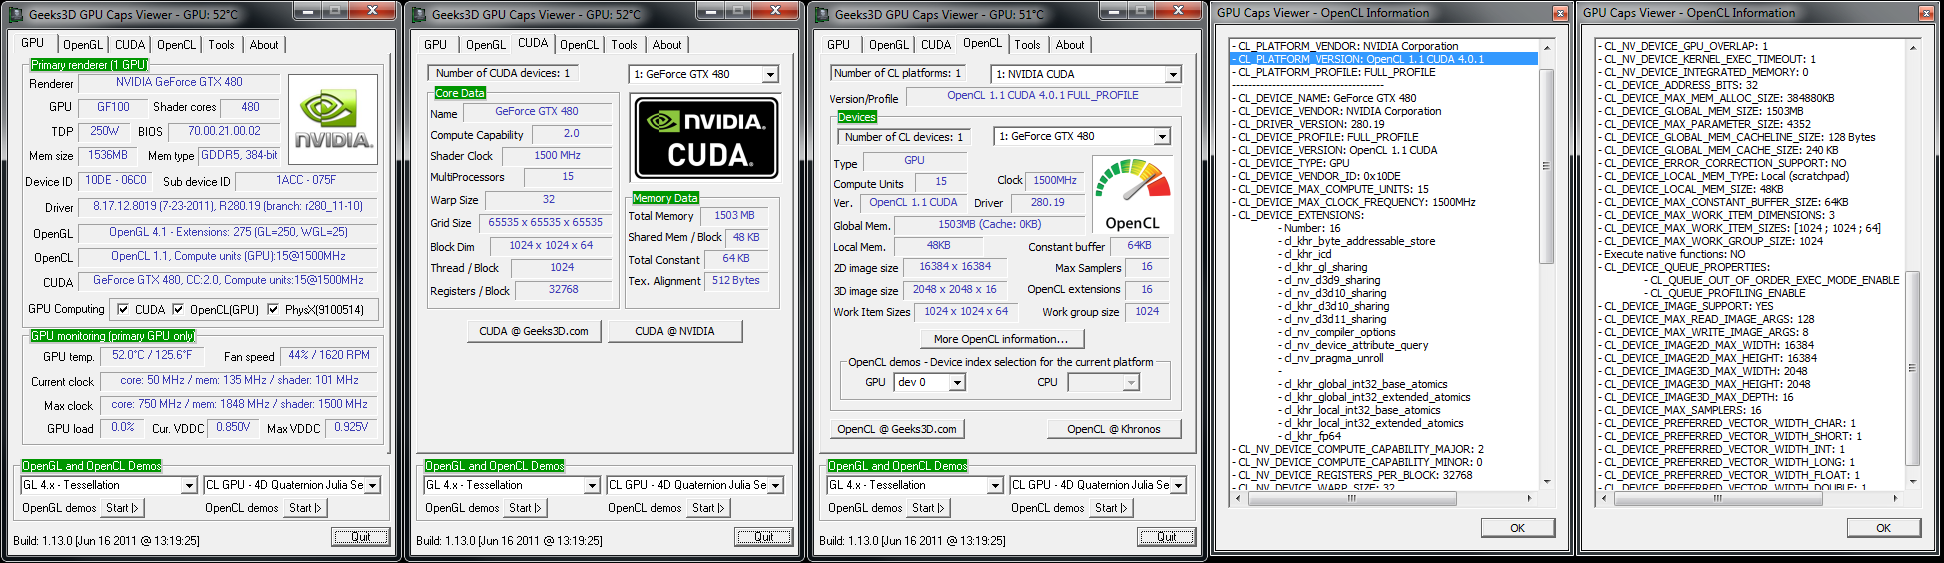 Overview with GPU Caps Viewer. Open CL has been upgraded to 1.1 and CL_DEVICE_IMAGE2D_MAX_WIDTH and _HEIGHT have been changed.